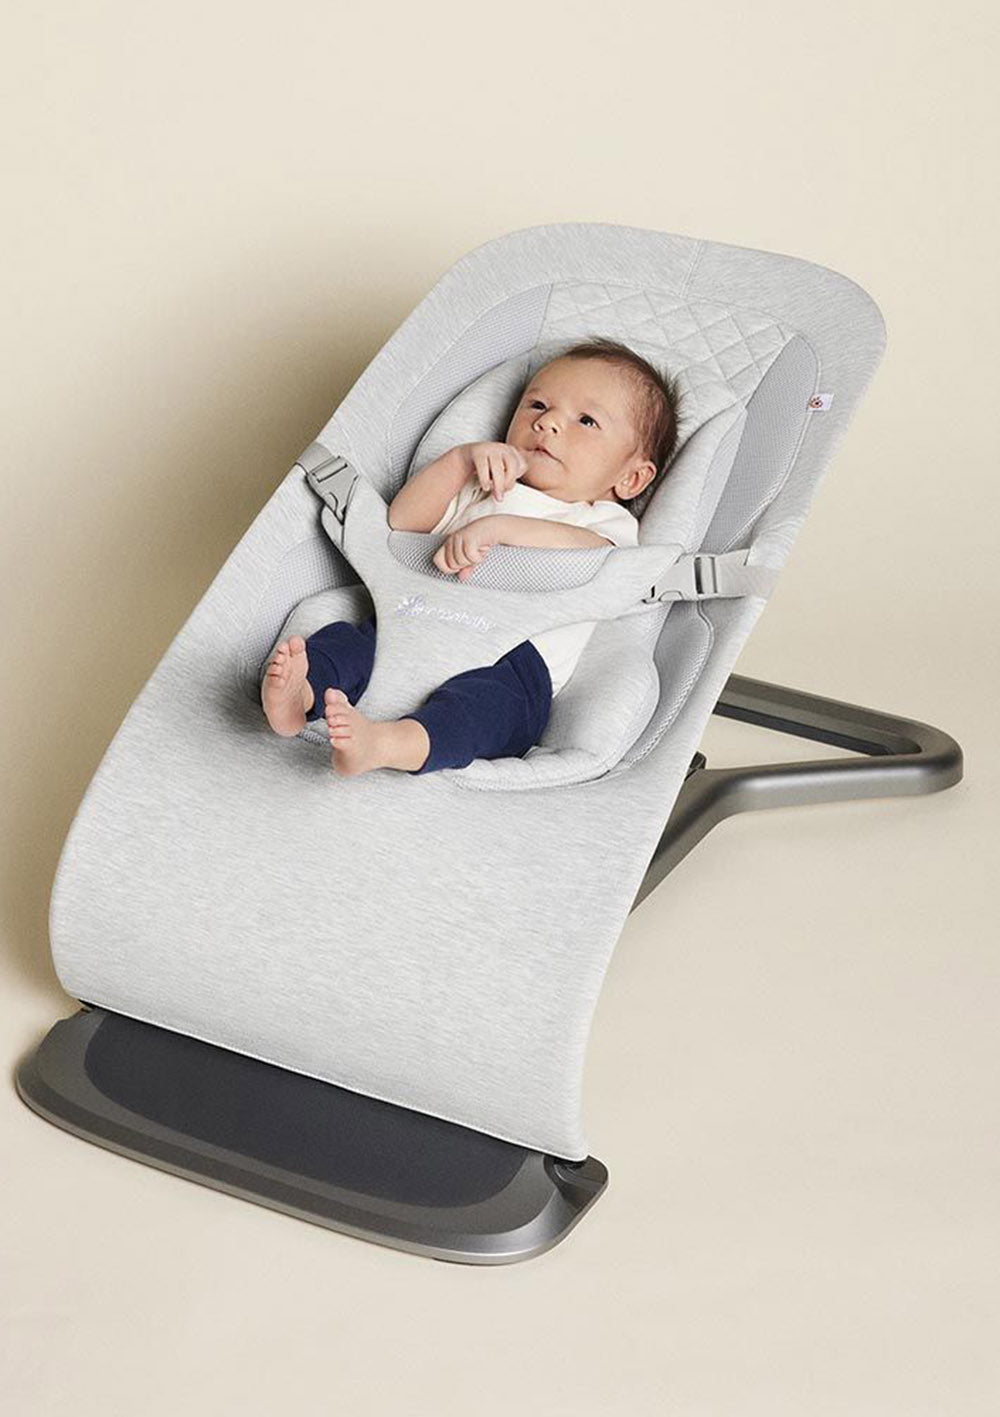 'Evolve' 3-in-1 Babywippe light grey